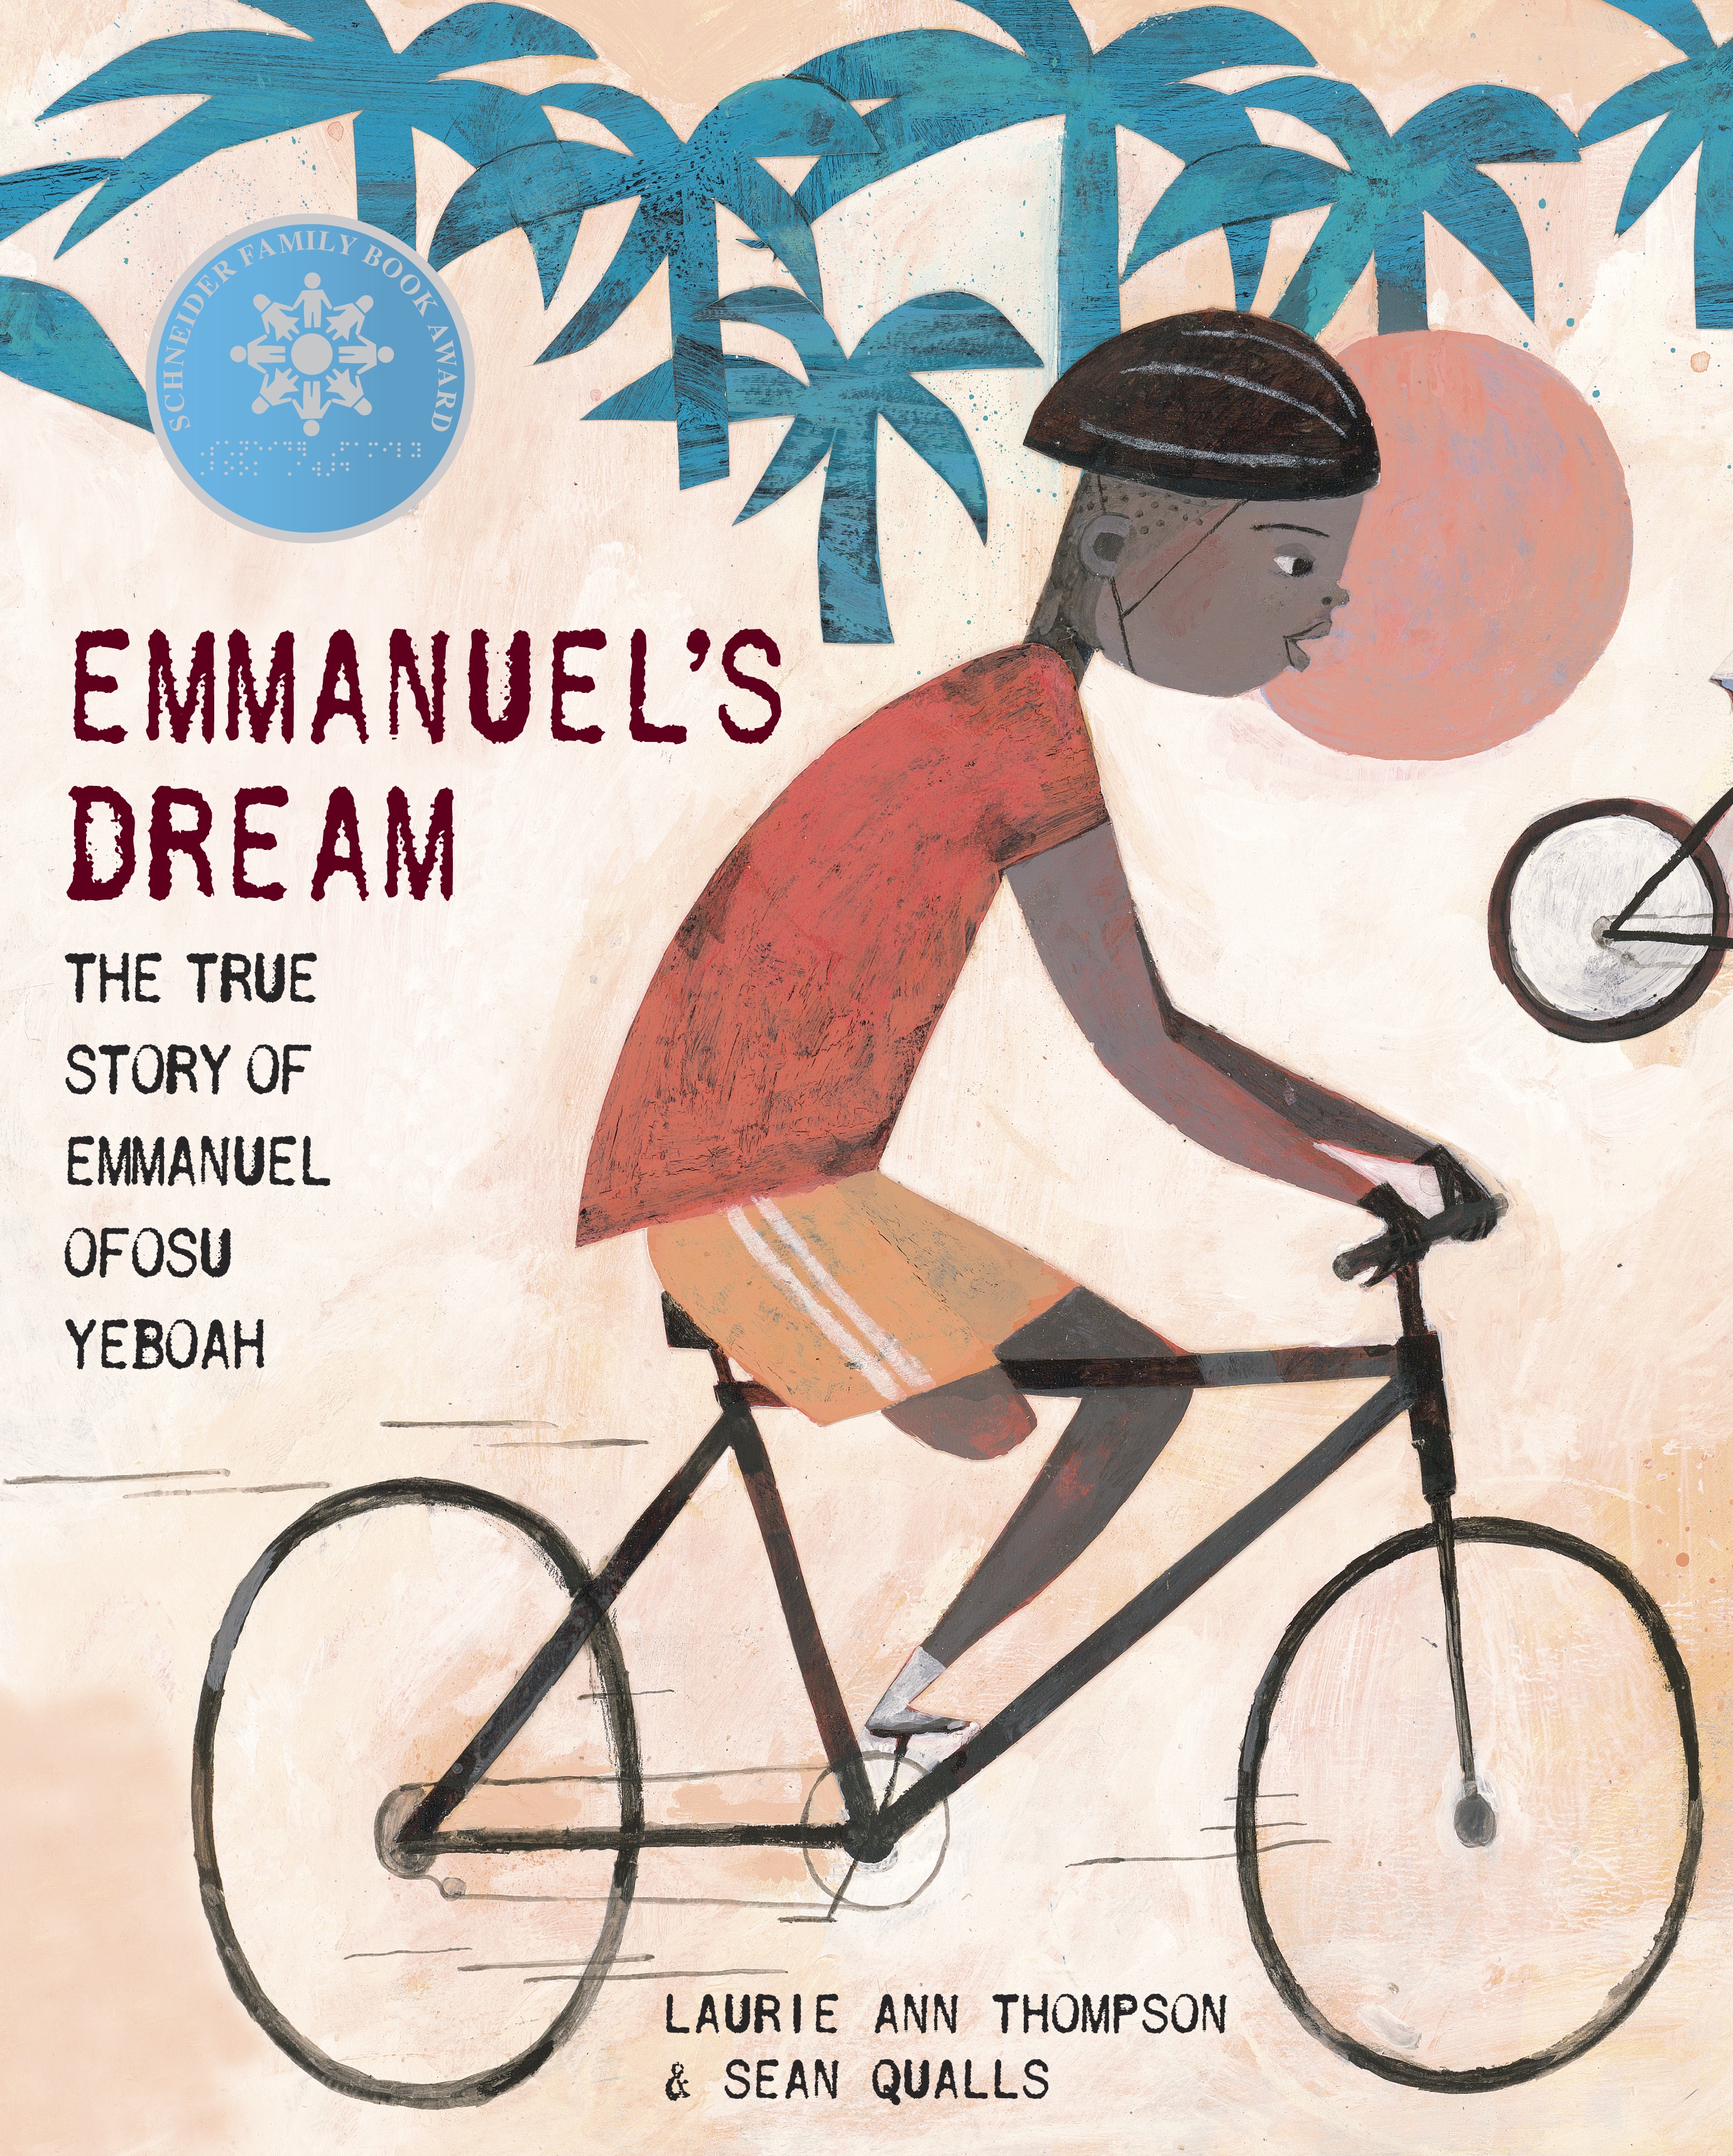 illustrated book cover showing a Black man with one leg on a bicycle and palm trees in background